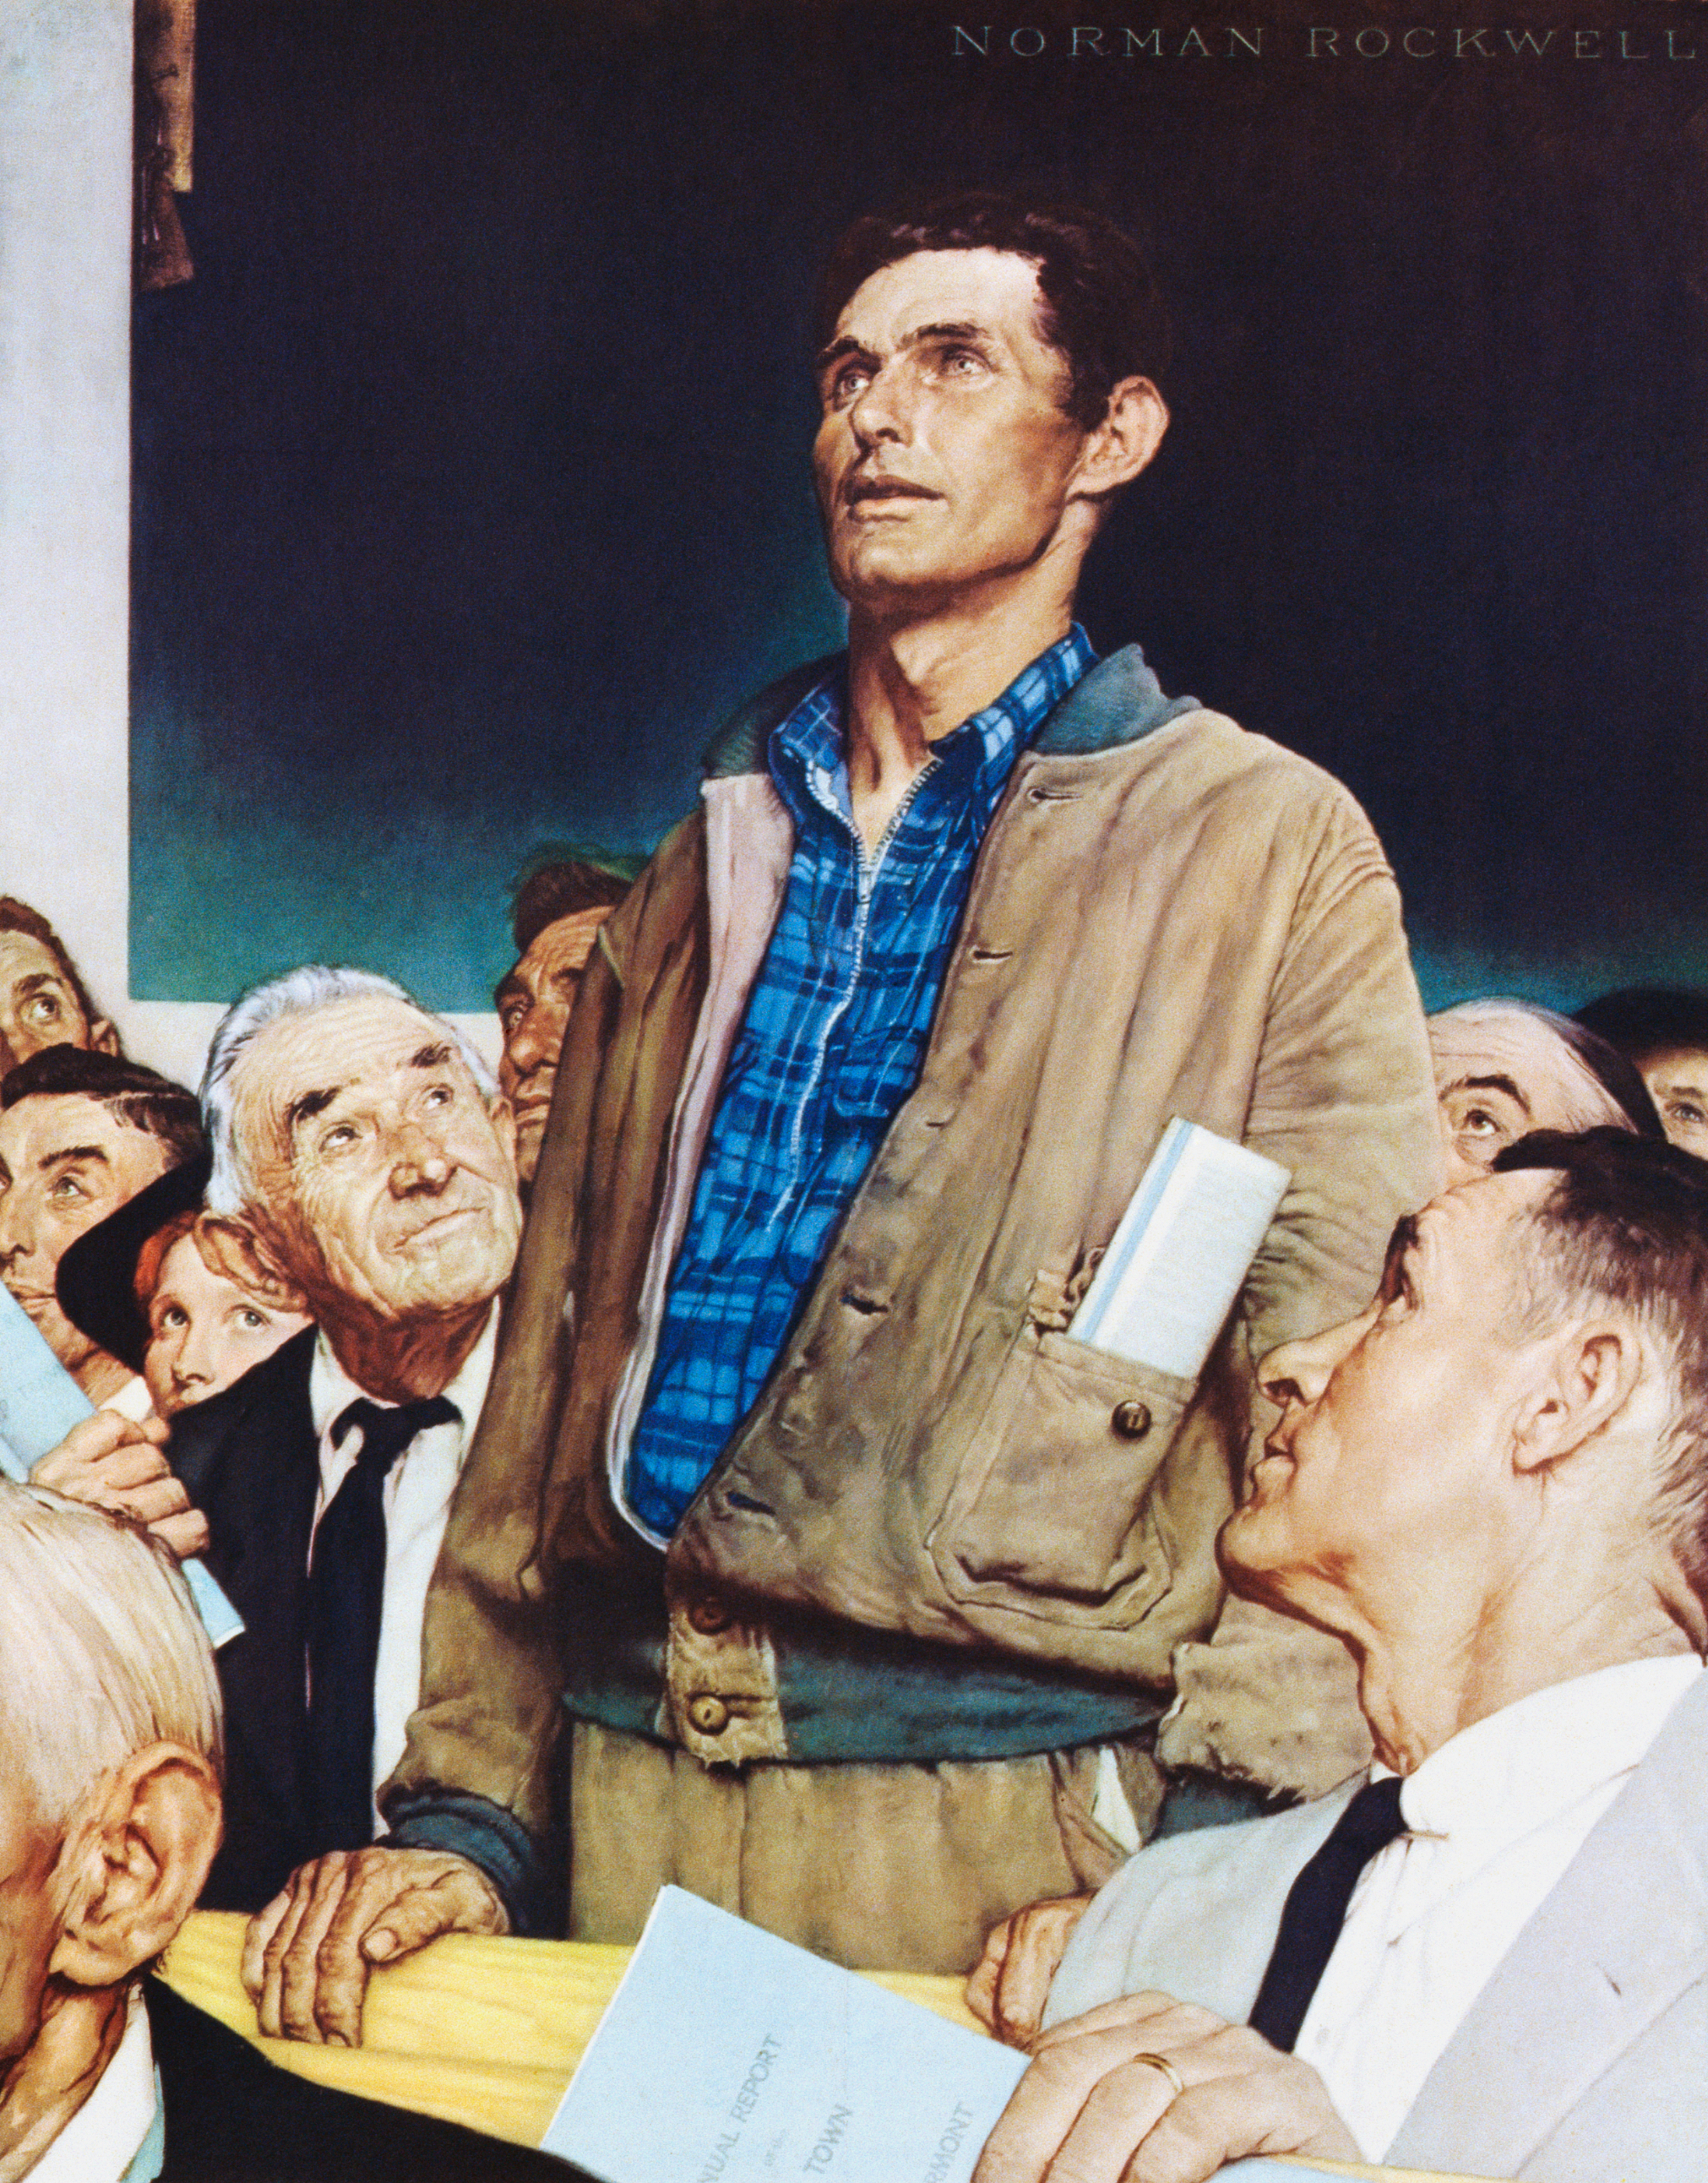 Norman Rockwell painting &quot;Freedom of Speech&quot;: a man stands up to speak his mind in a meeting